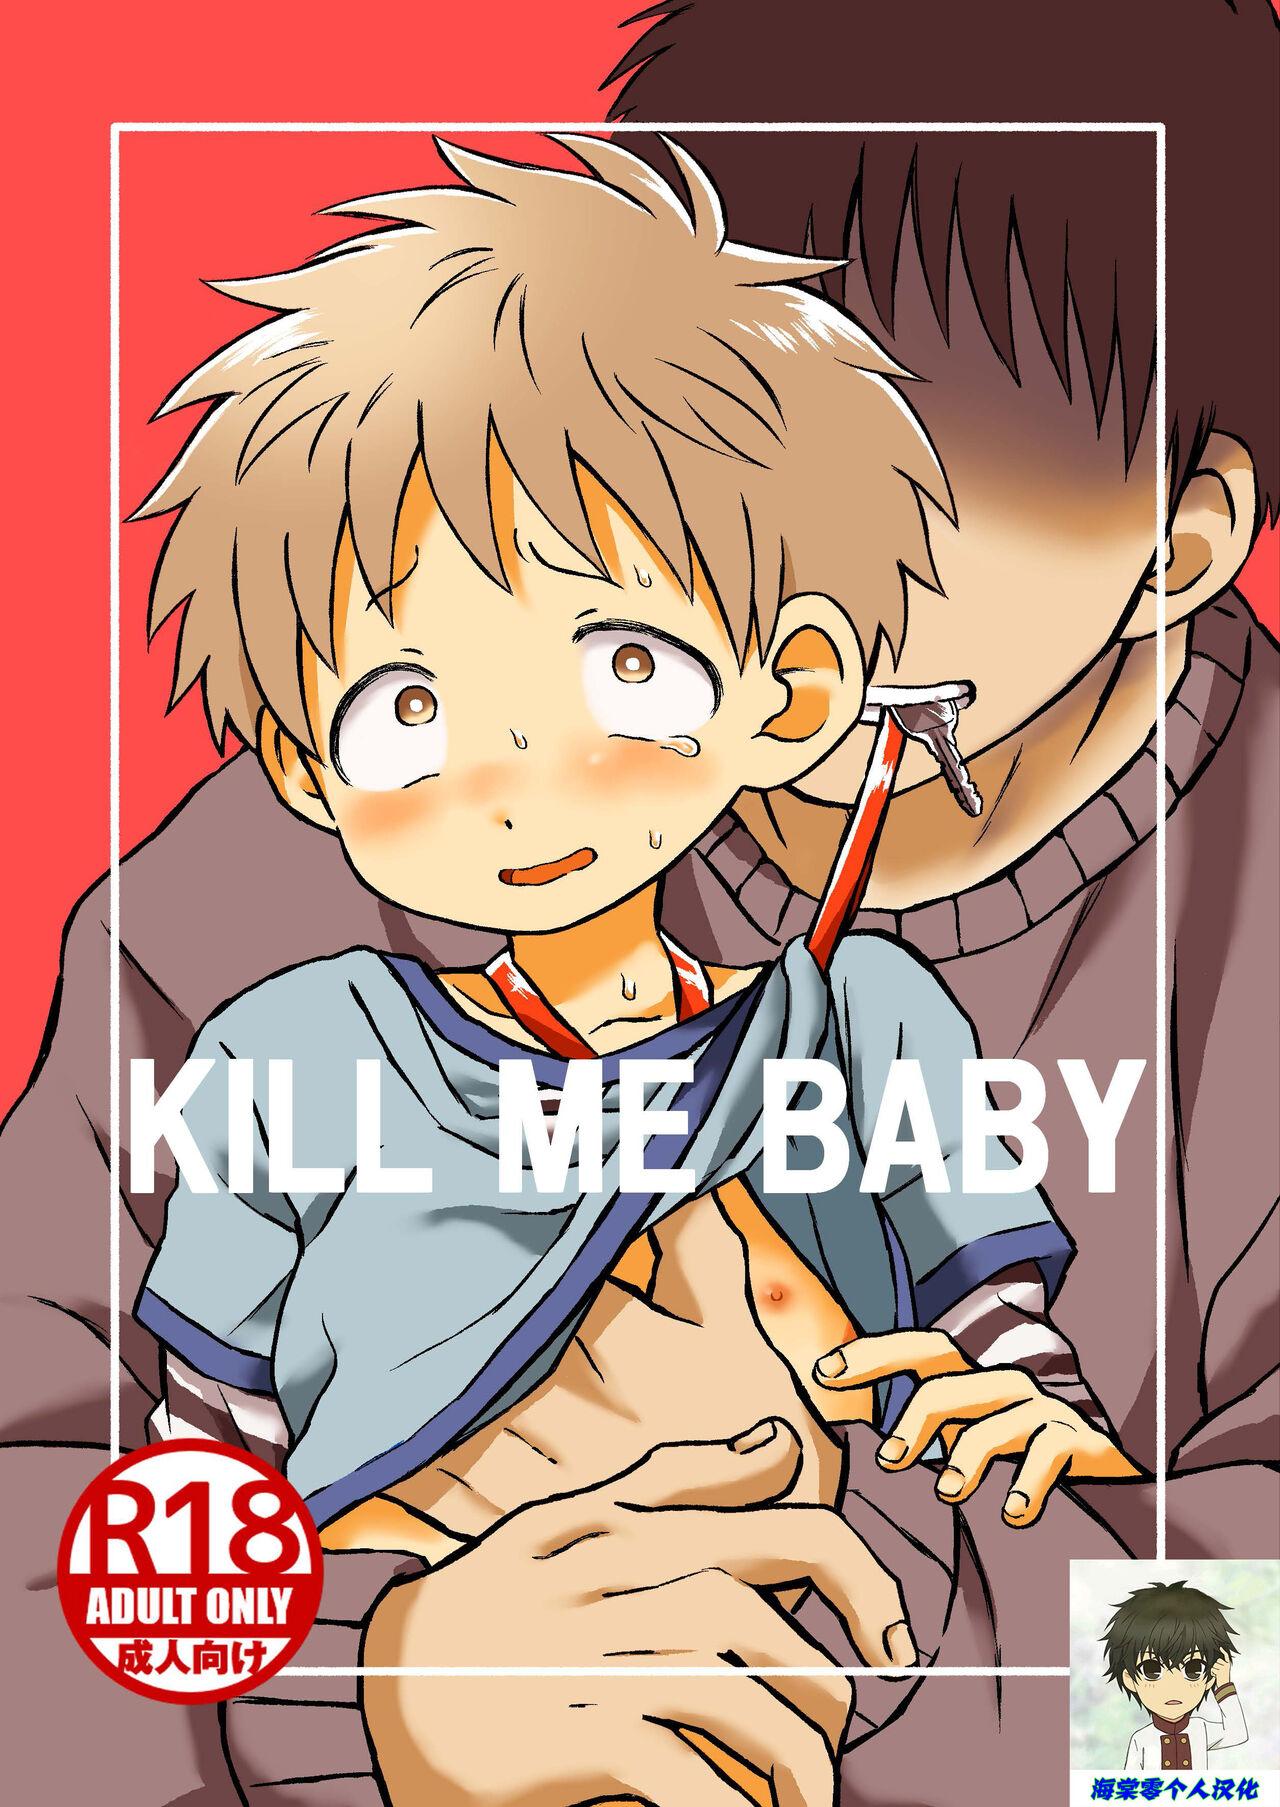 Atm KILL ME BABY - Original Submissive - Page 1